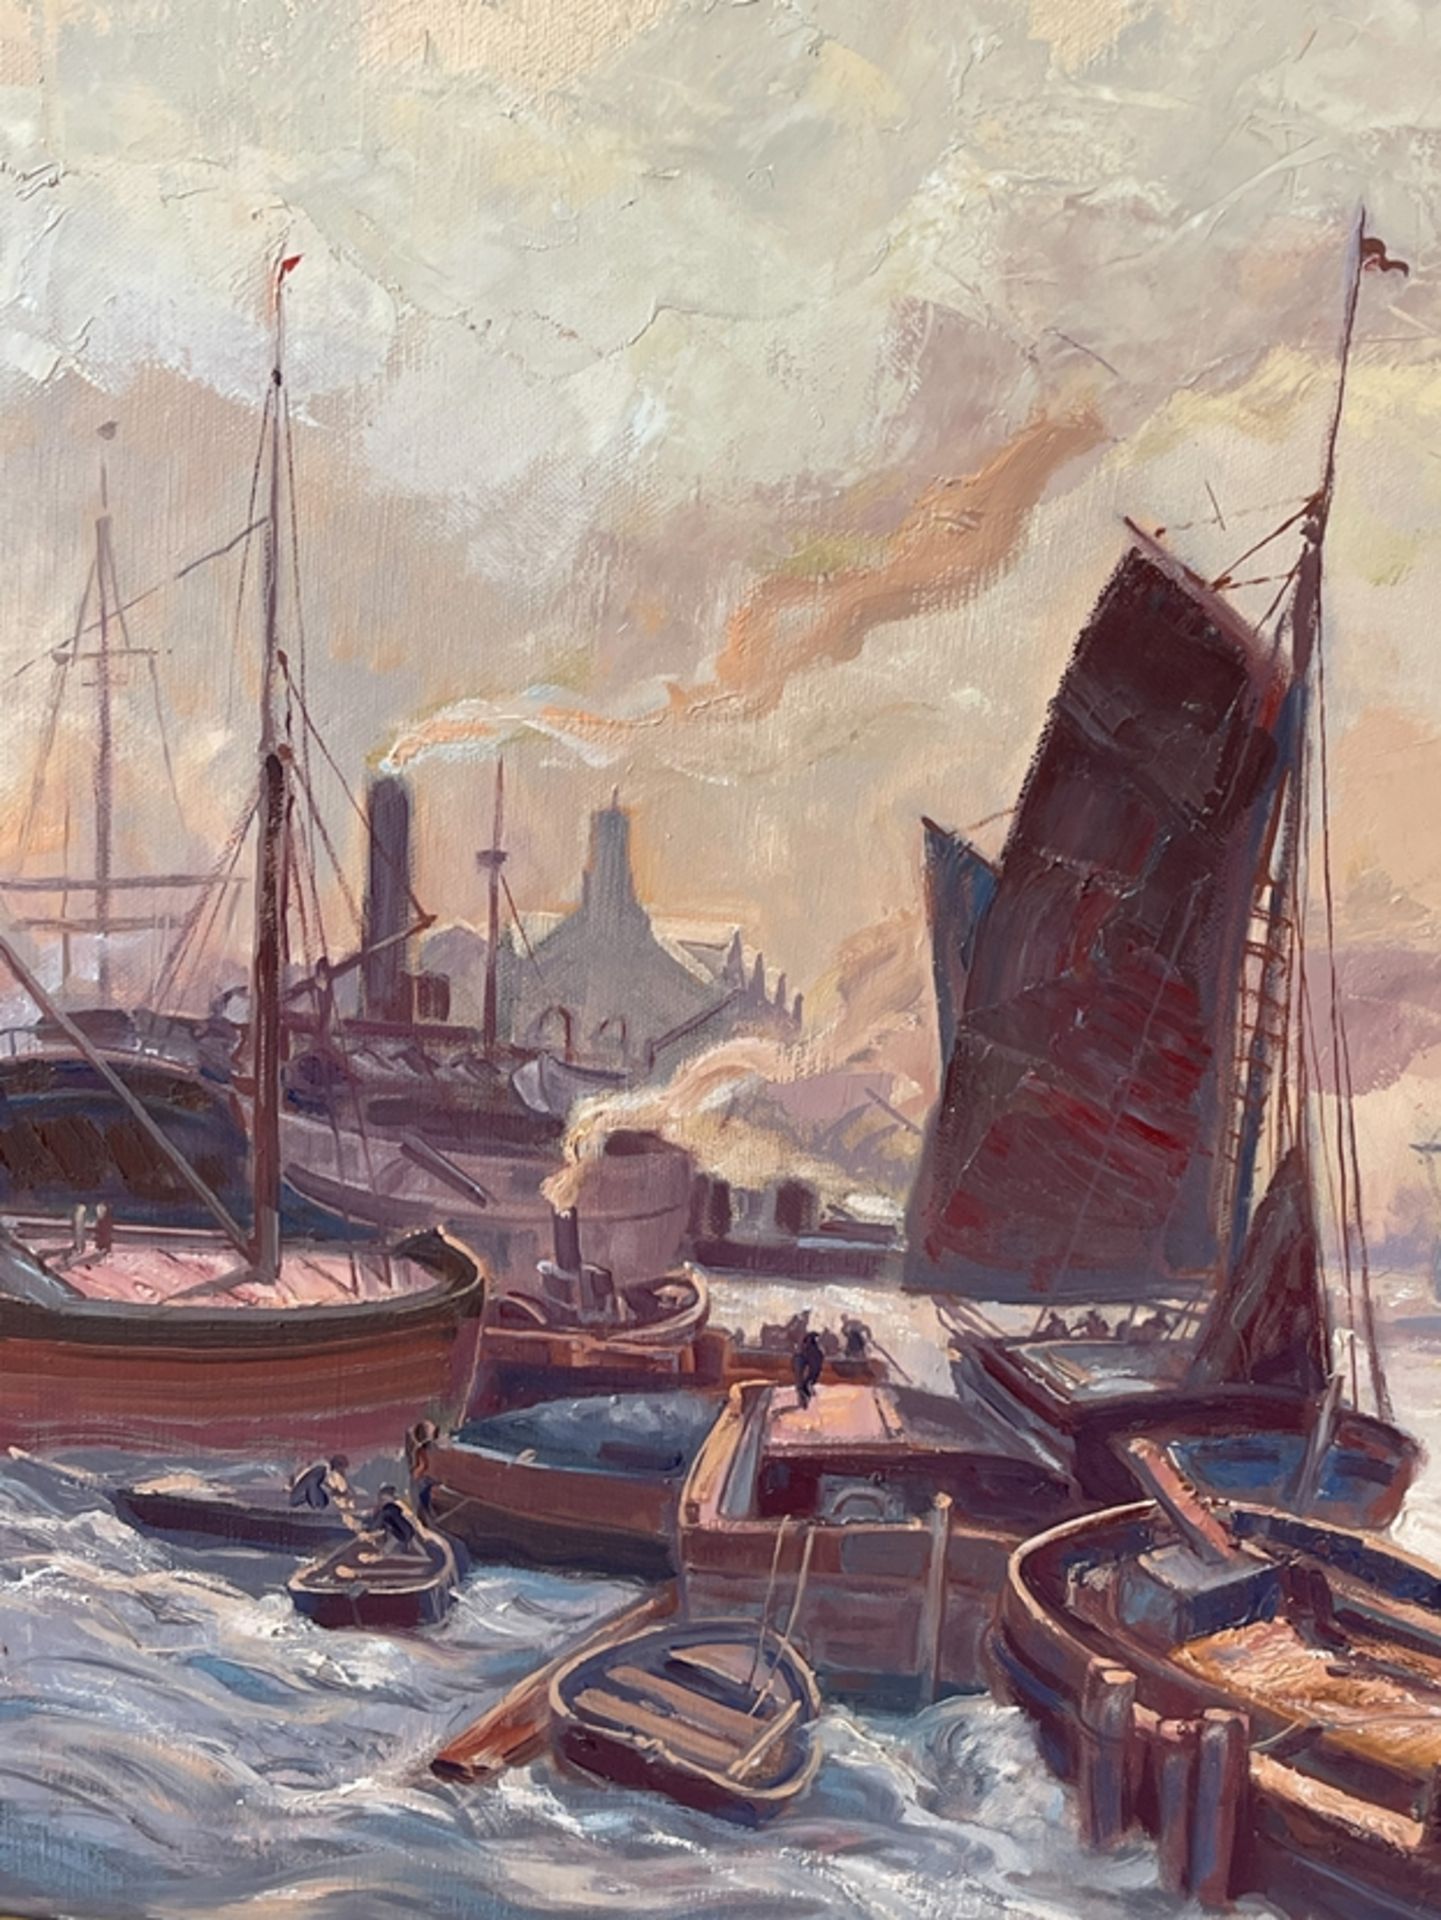 Painting harbor with ships - Image 3 of 5